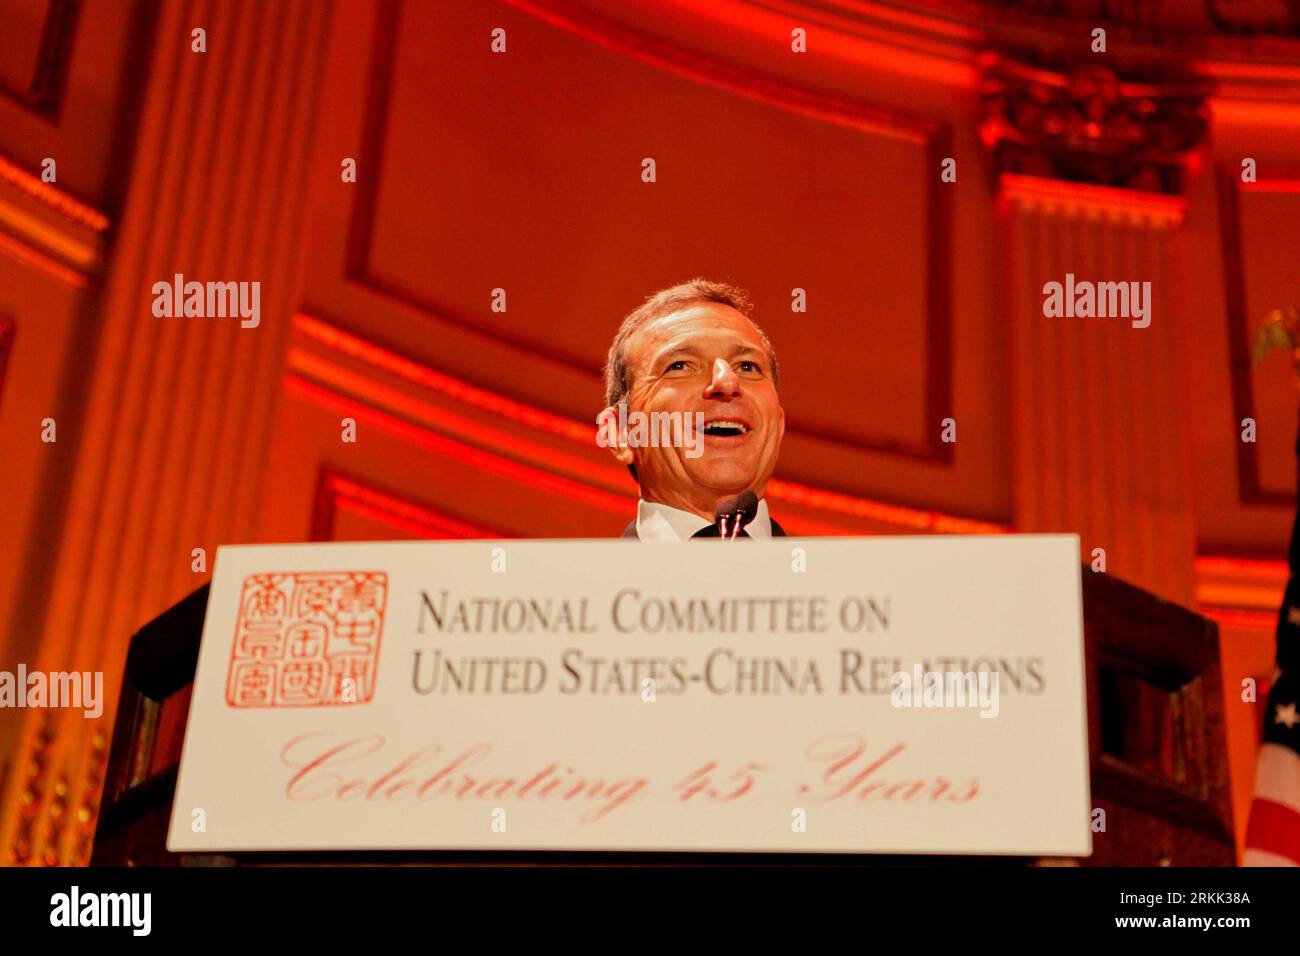 Bildnummer: 56193146  Datum: 18.10.2011  Copyright: imago/Xinhua (111018) -- NEW YORK, Oct. 18, 2011 (Xinhua) -- Robert A. Iger, president and CEO of The Walt Disney Co. addresses the 45th Anniversary Gala Dinner of the National Committee on U.S.-China Relations in New York, the United States, Oct. 18, 2011. Established in 1966, the National Committee on U.S.-China Relations is a non-partisan organization that seeks to promote better understanding between China and the United States. (Xinhua/Fan Xia) (jl) U.S.-CHINA-NATIONAL COMMITTE ON U.S.-CHINA RELATIONS-CEREMONY PUBLICATIONxNOTxINxCHN Peop Stock Photo